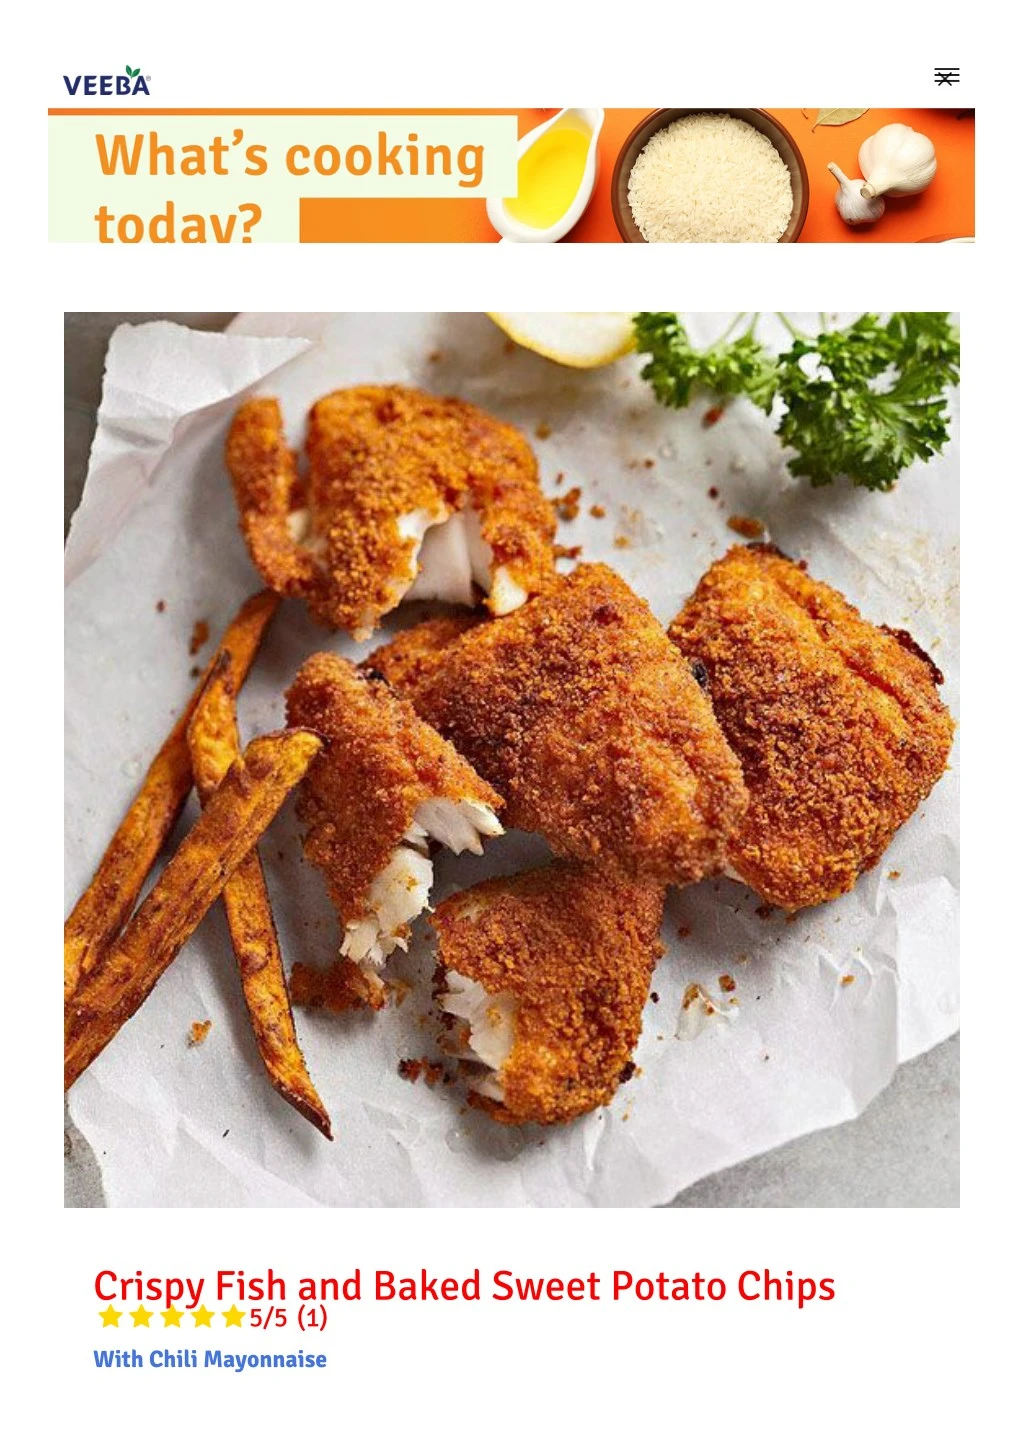 crispy fish and baked sweet potato chips 5 5 1